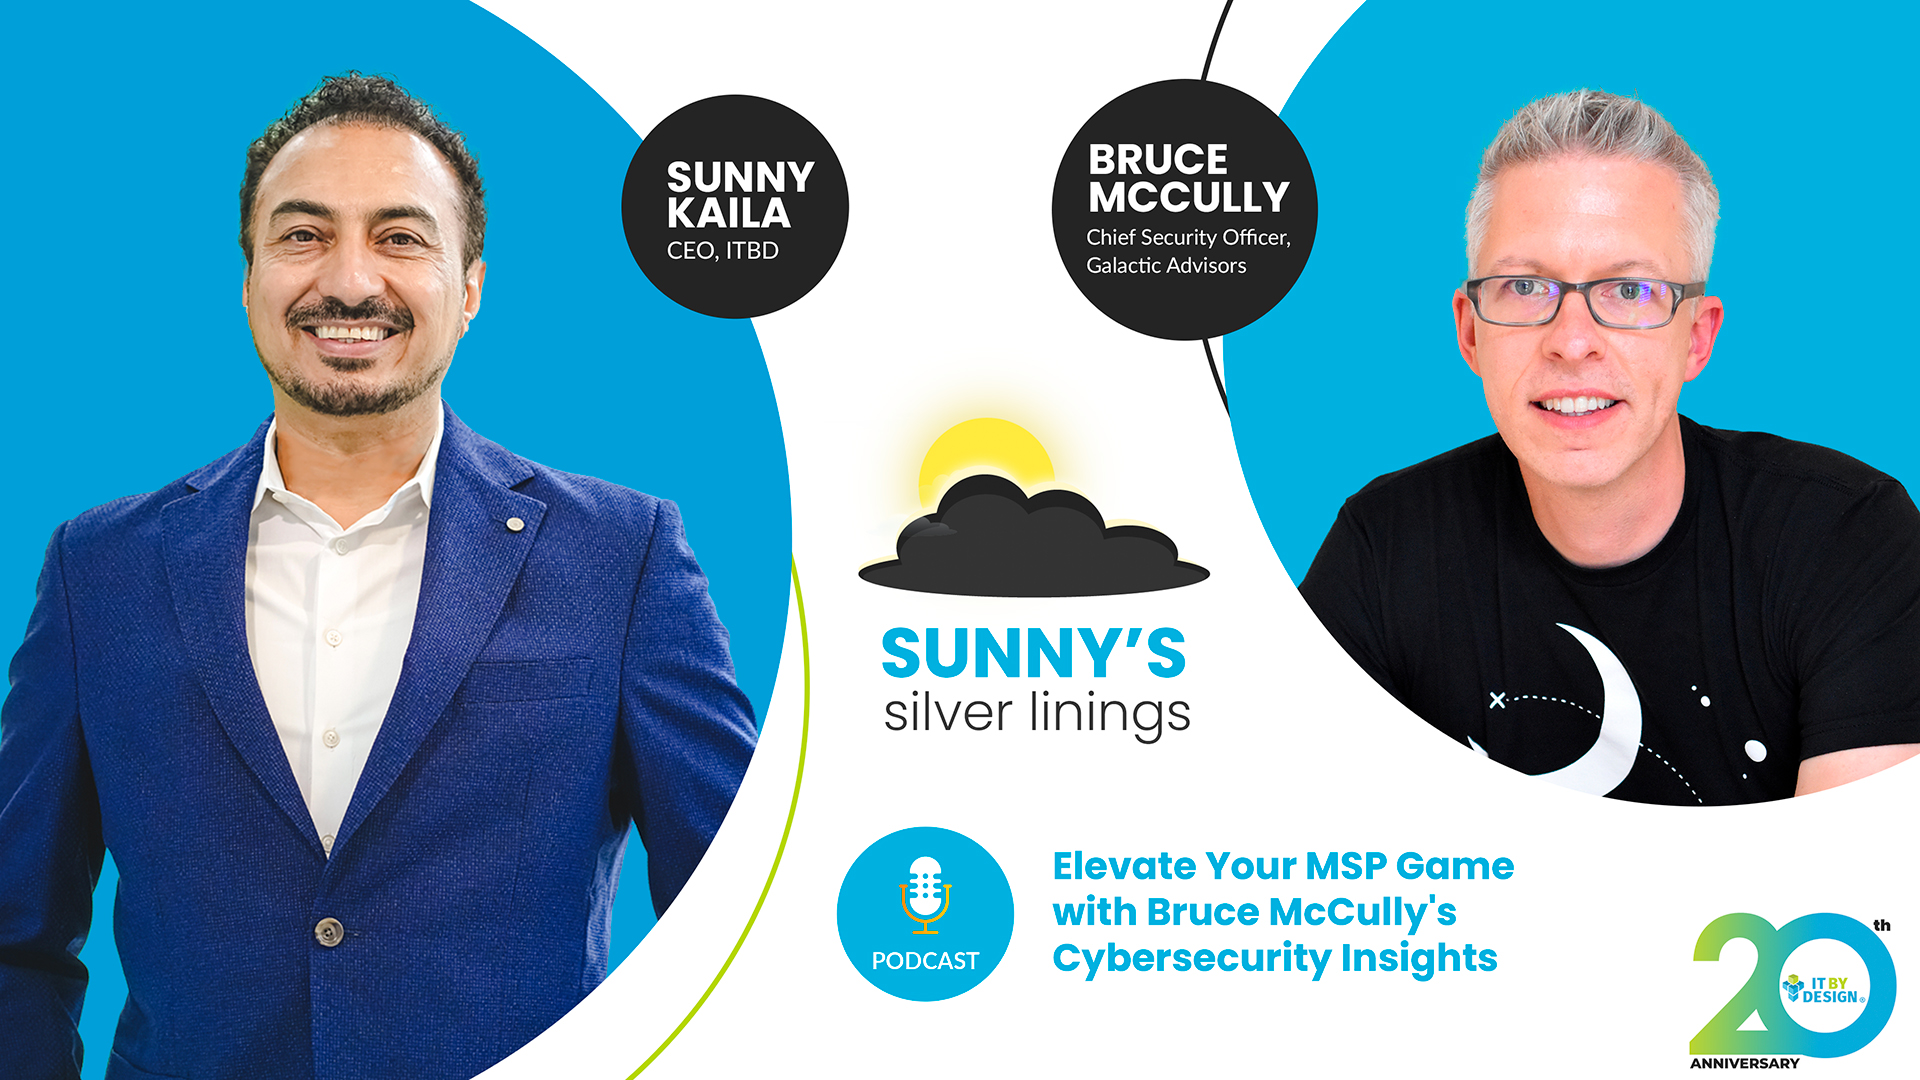 Elevate Your MSP Game with Bruce McCully's Cybersecurity Insights